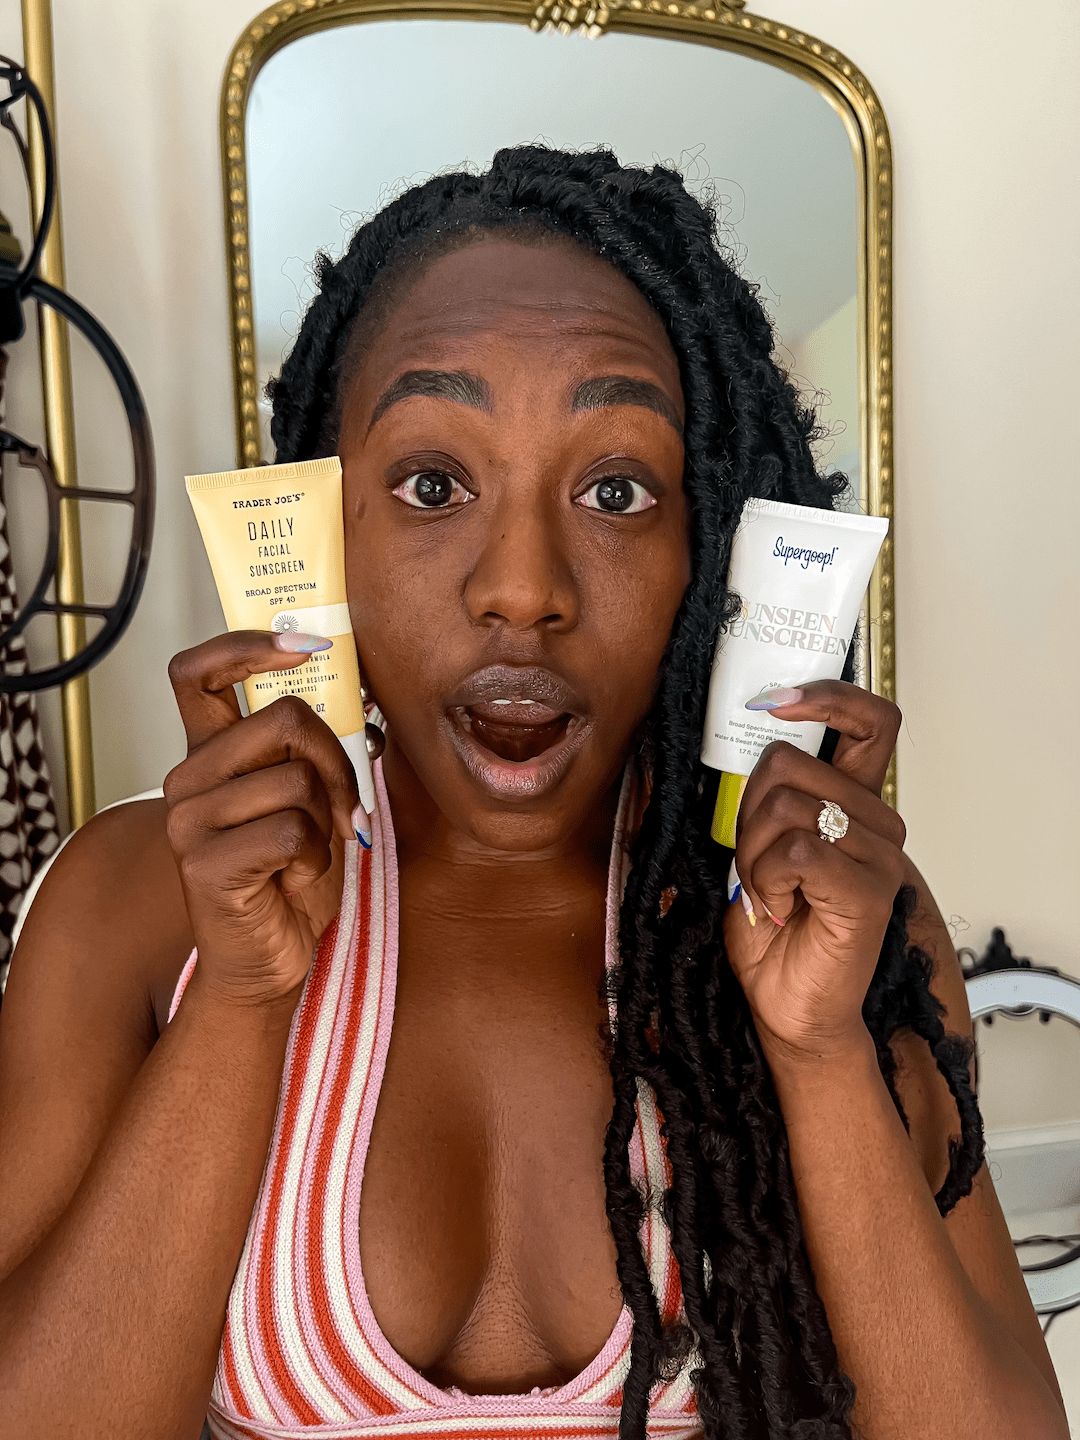 comparing supergroup unseen sunscreen to a $9 dupe | Supergoop vs. Trader Joe’s Sunscreen